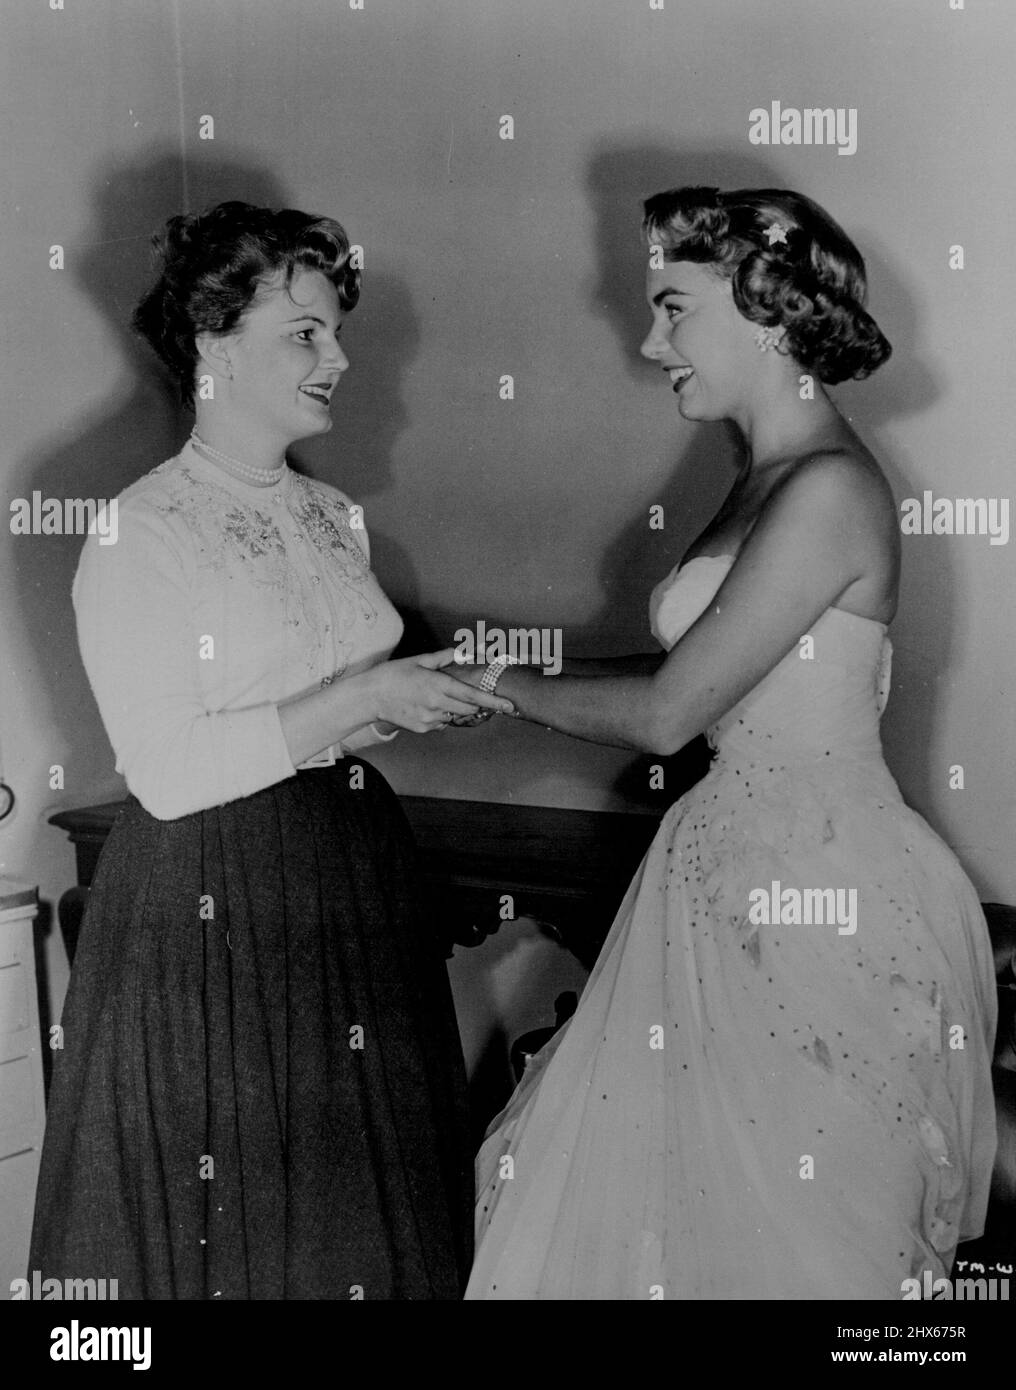 Attractive, talented Susan Zanuck, who along with Miss Moore was a member of the Hollywood troupe which entertained United Nations troops in Korea during the holidays, and the daughter of 20th Century-Fox's vice-president in charge of production, Darryl F. Zanuck, is shown greeting vivacious Miss Moore rind helping with the final touches on her stunning evening attire. December 03, 1954. Stock Photo